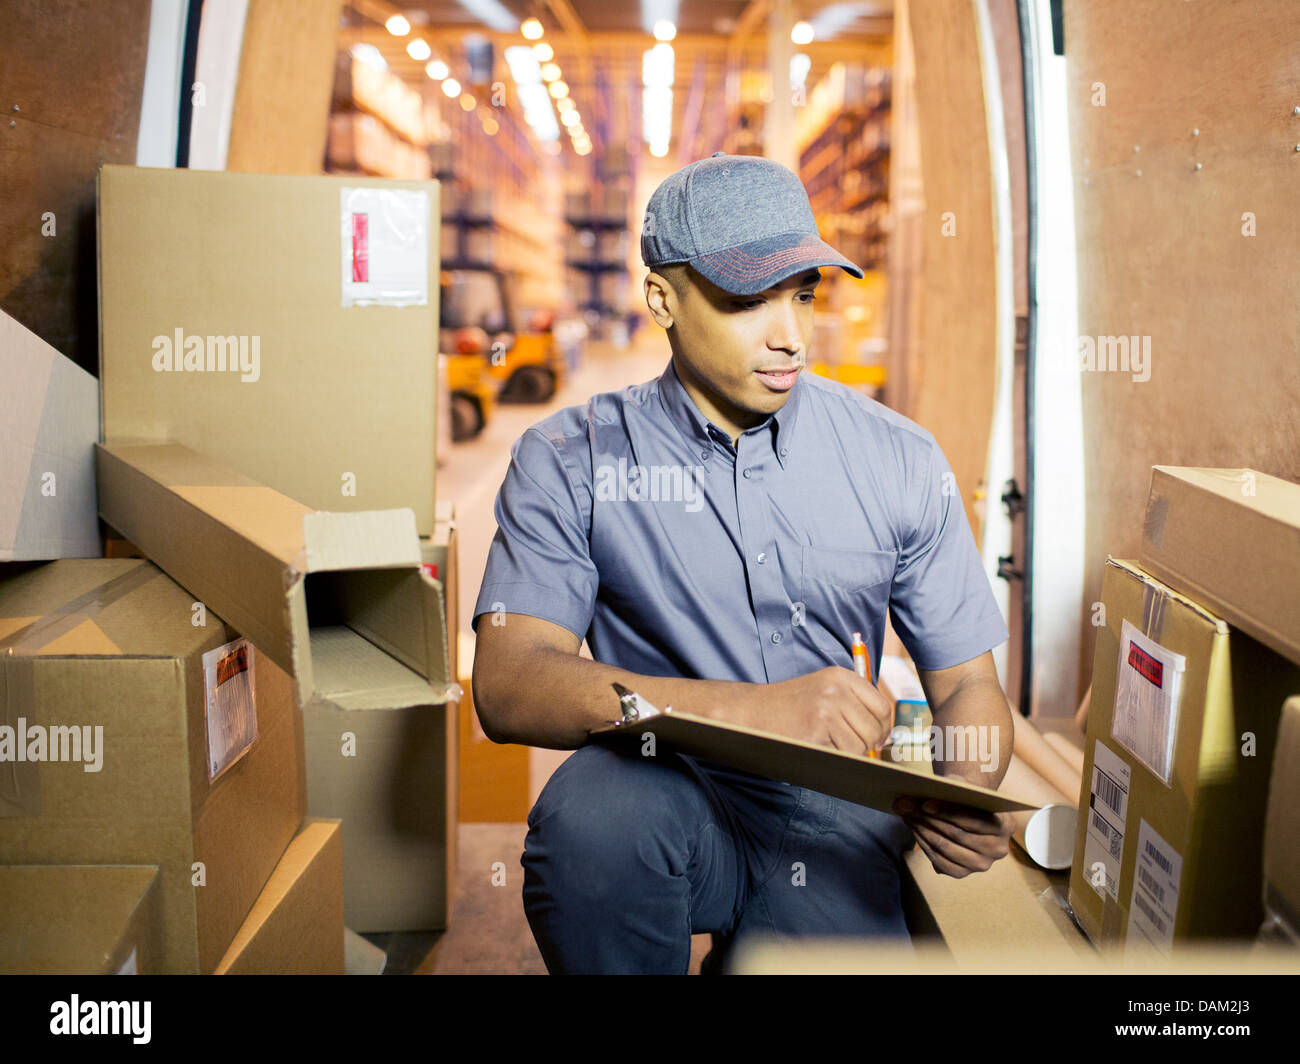 Delivery boy checking boxes in van Stock Photo